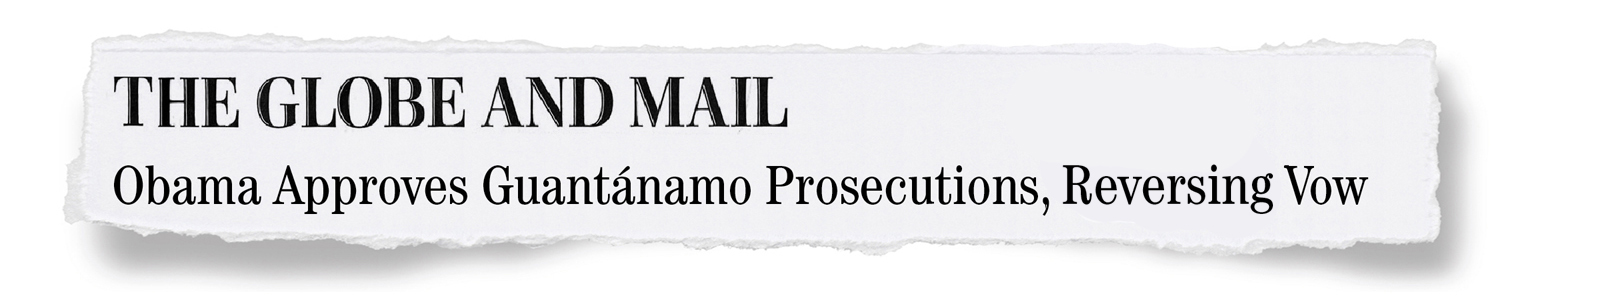 The Globe and Mail - Obama Approves Guantanamo Prosecutions, Reversing Vow